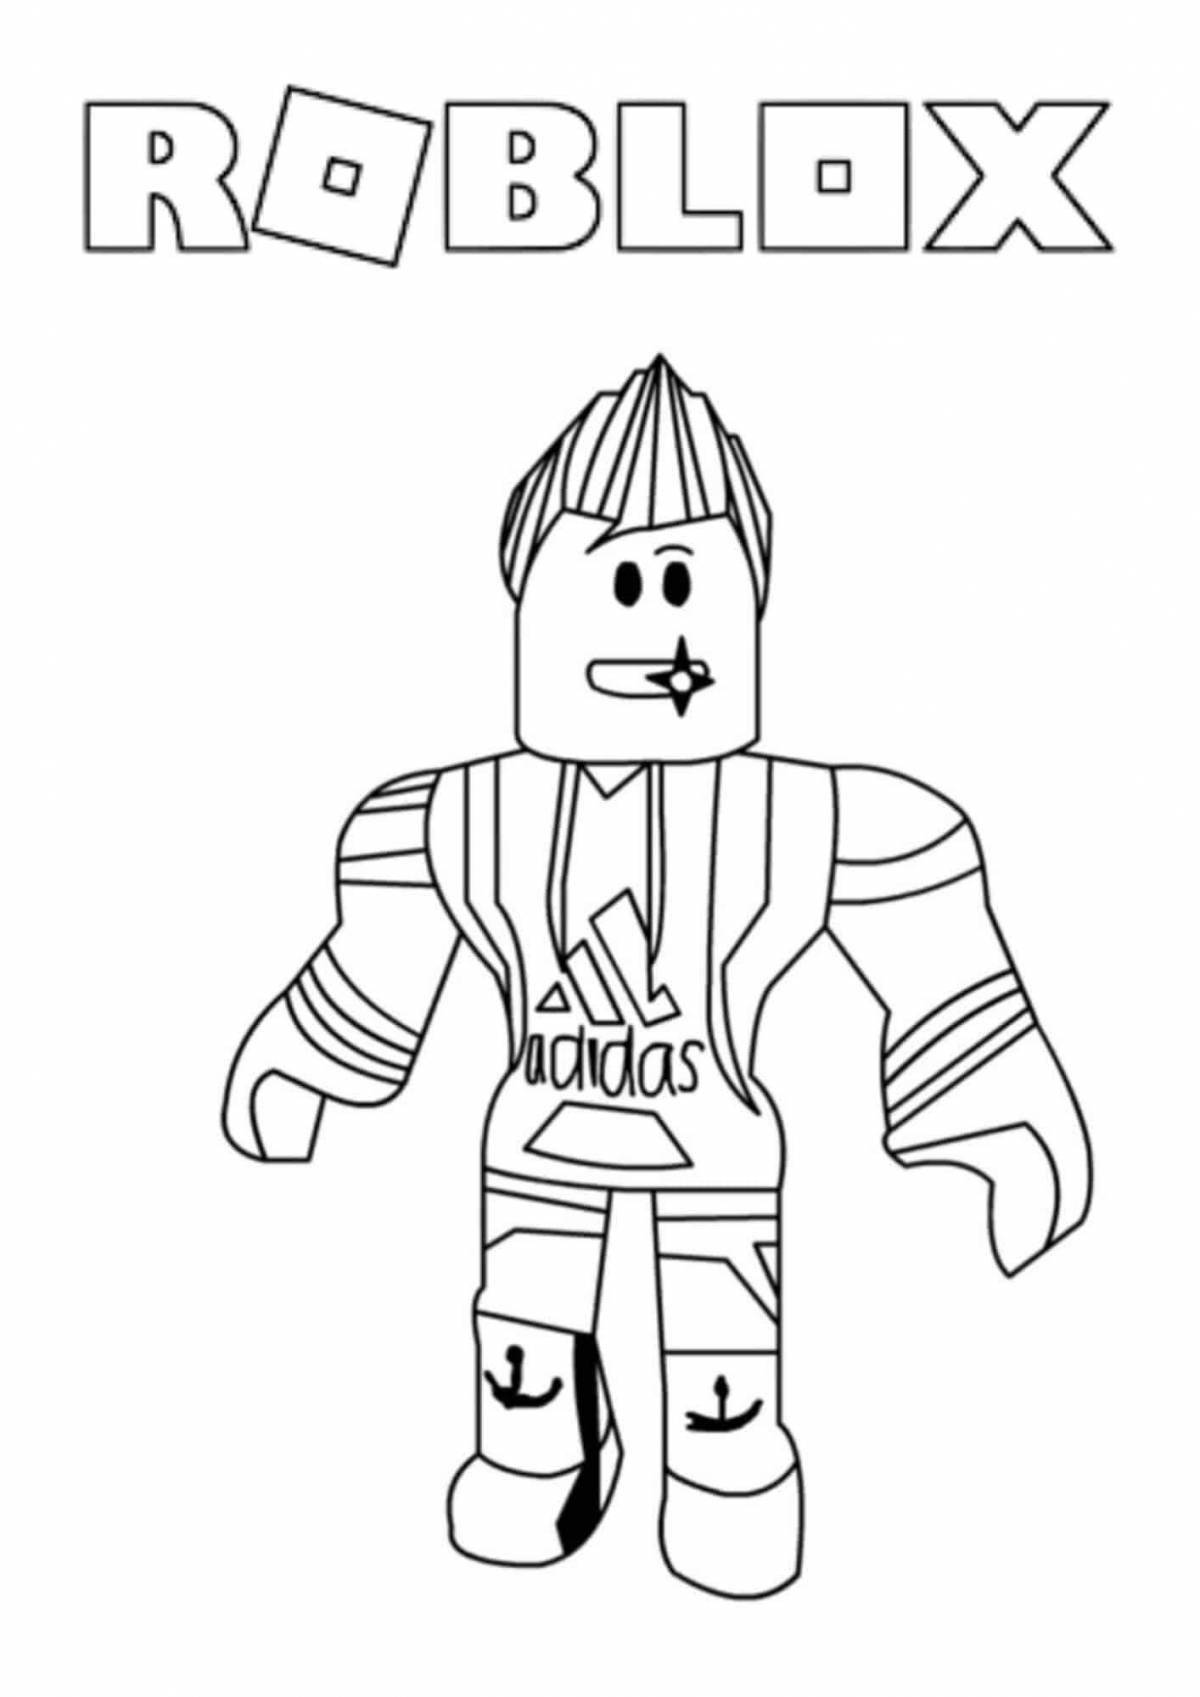 Roblox people girls coloring pages exploding with color